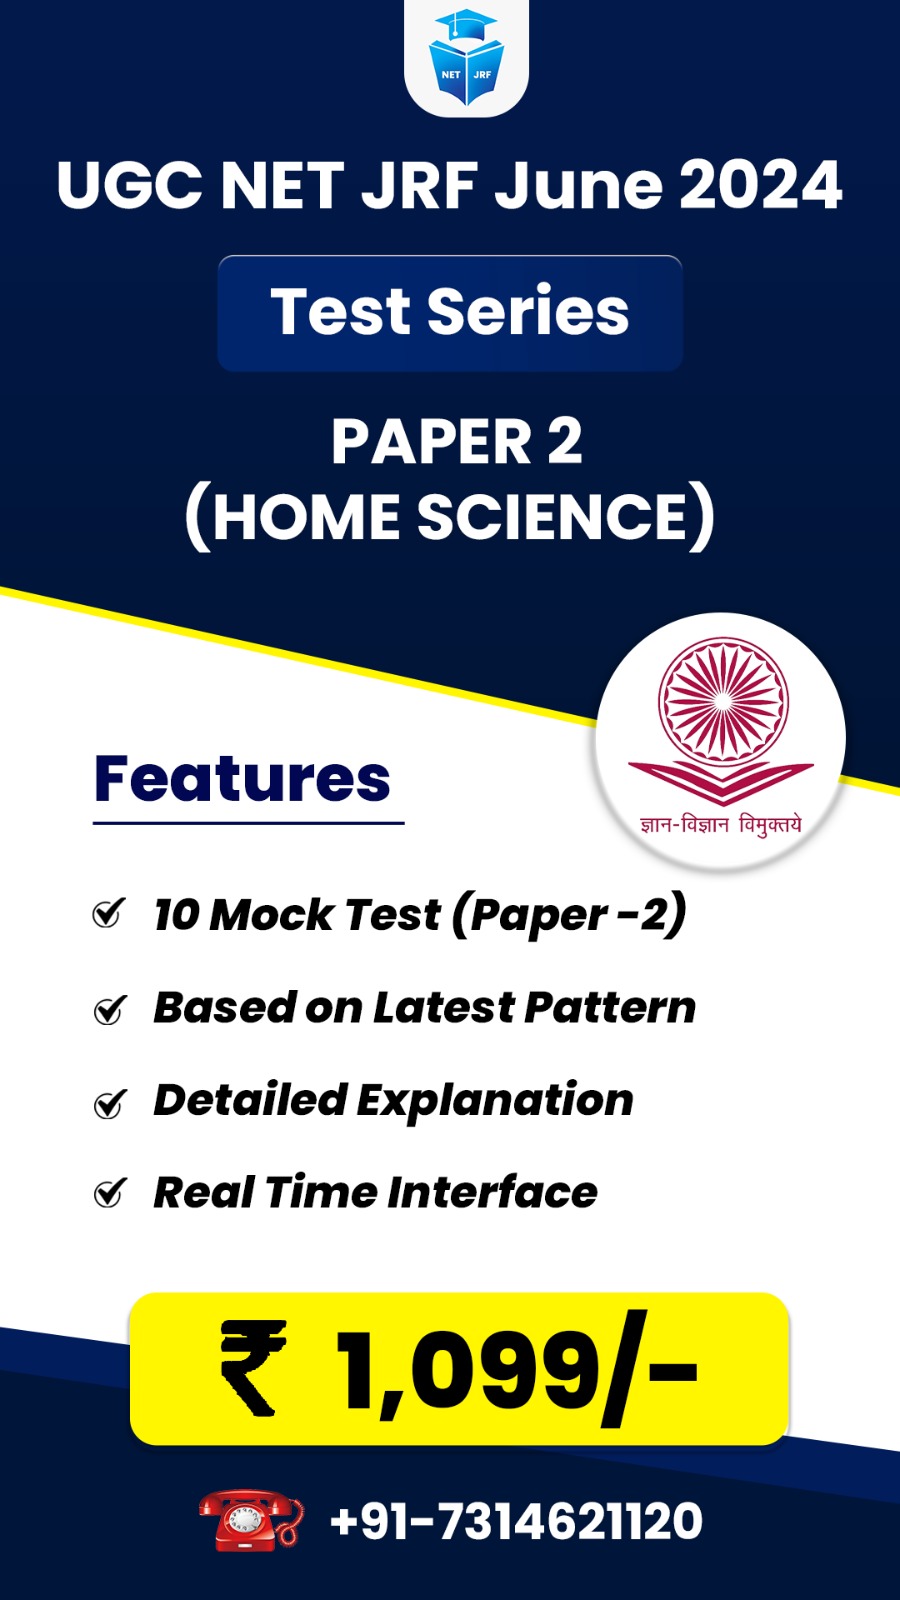 Home Science (Paper 2) Test Series for June 2024